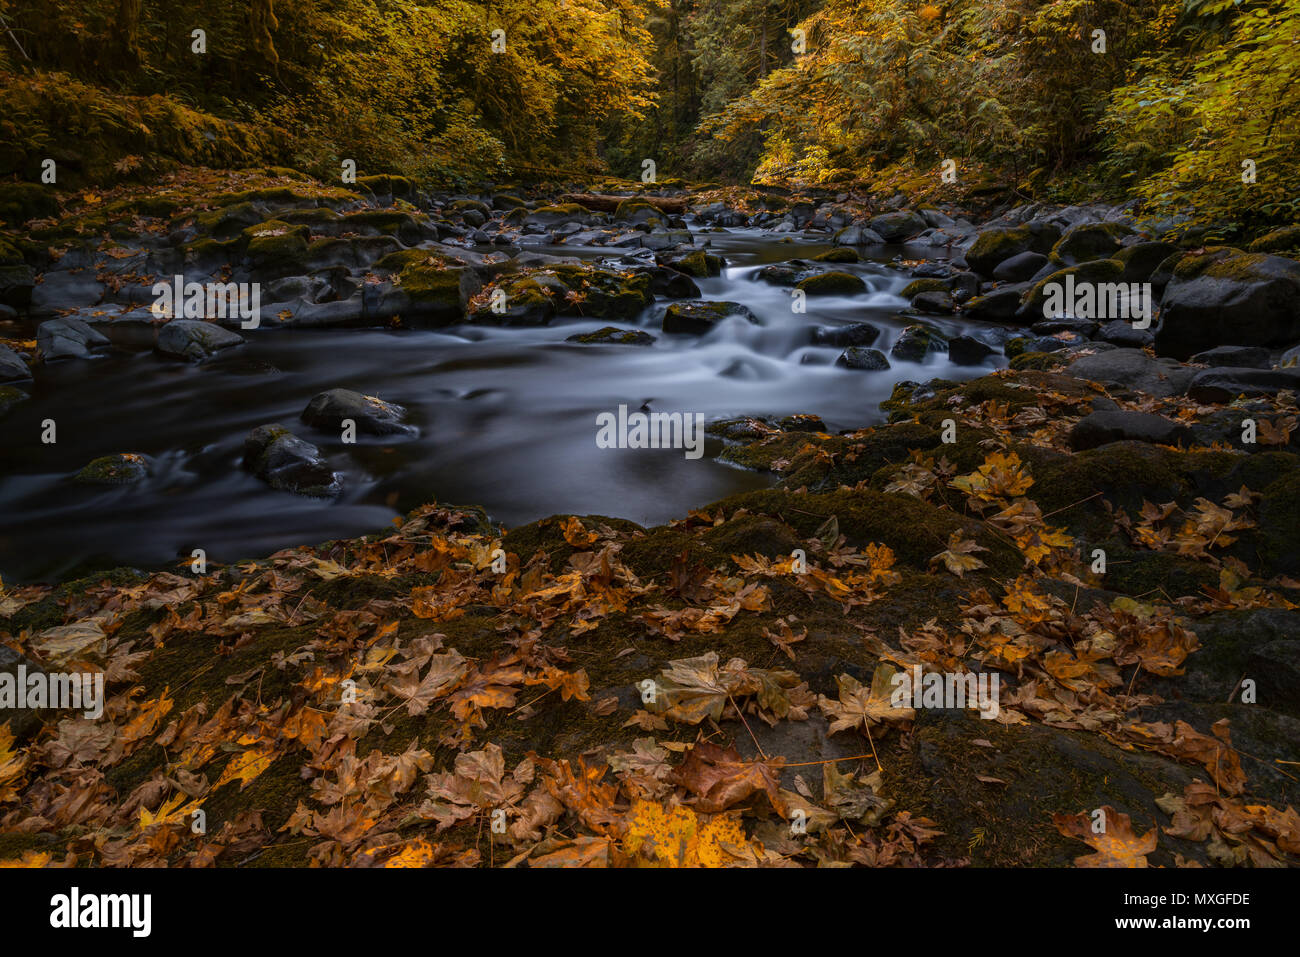 Forest creek waters flowing through autumn foliage forest wonderland Stock Photo